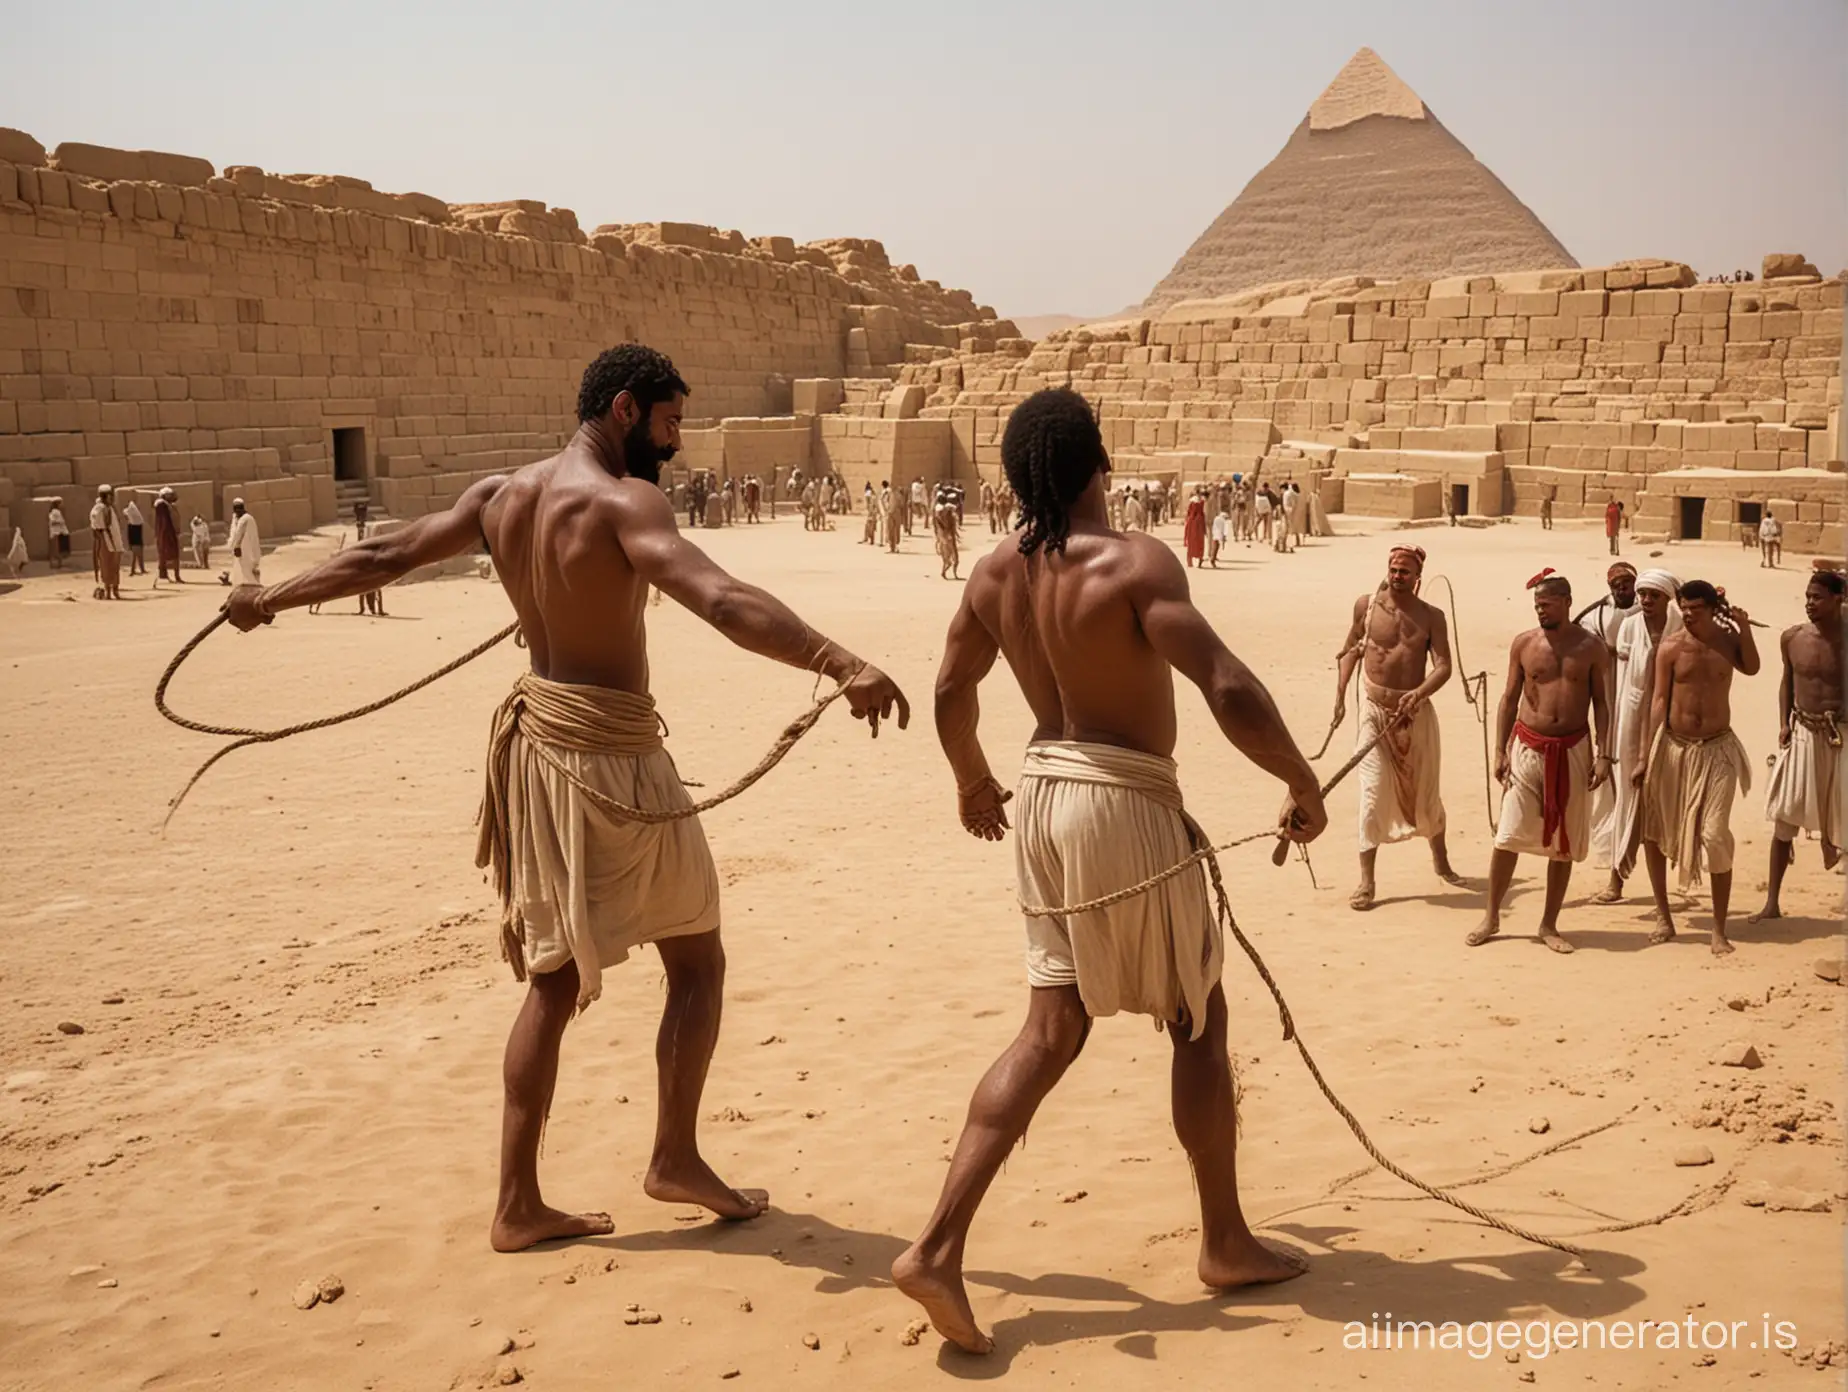 Jewish-Slave-Whipped-at-Ancient-Egyptian-Pyramid-Construction-Site